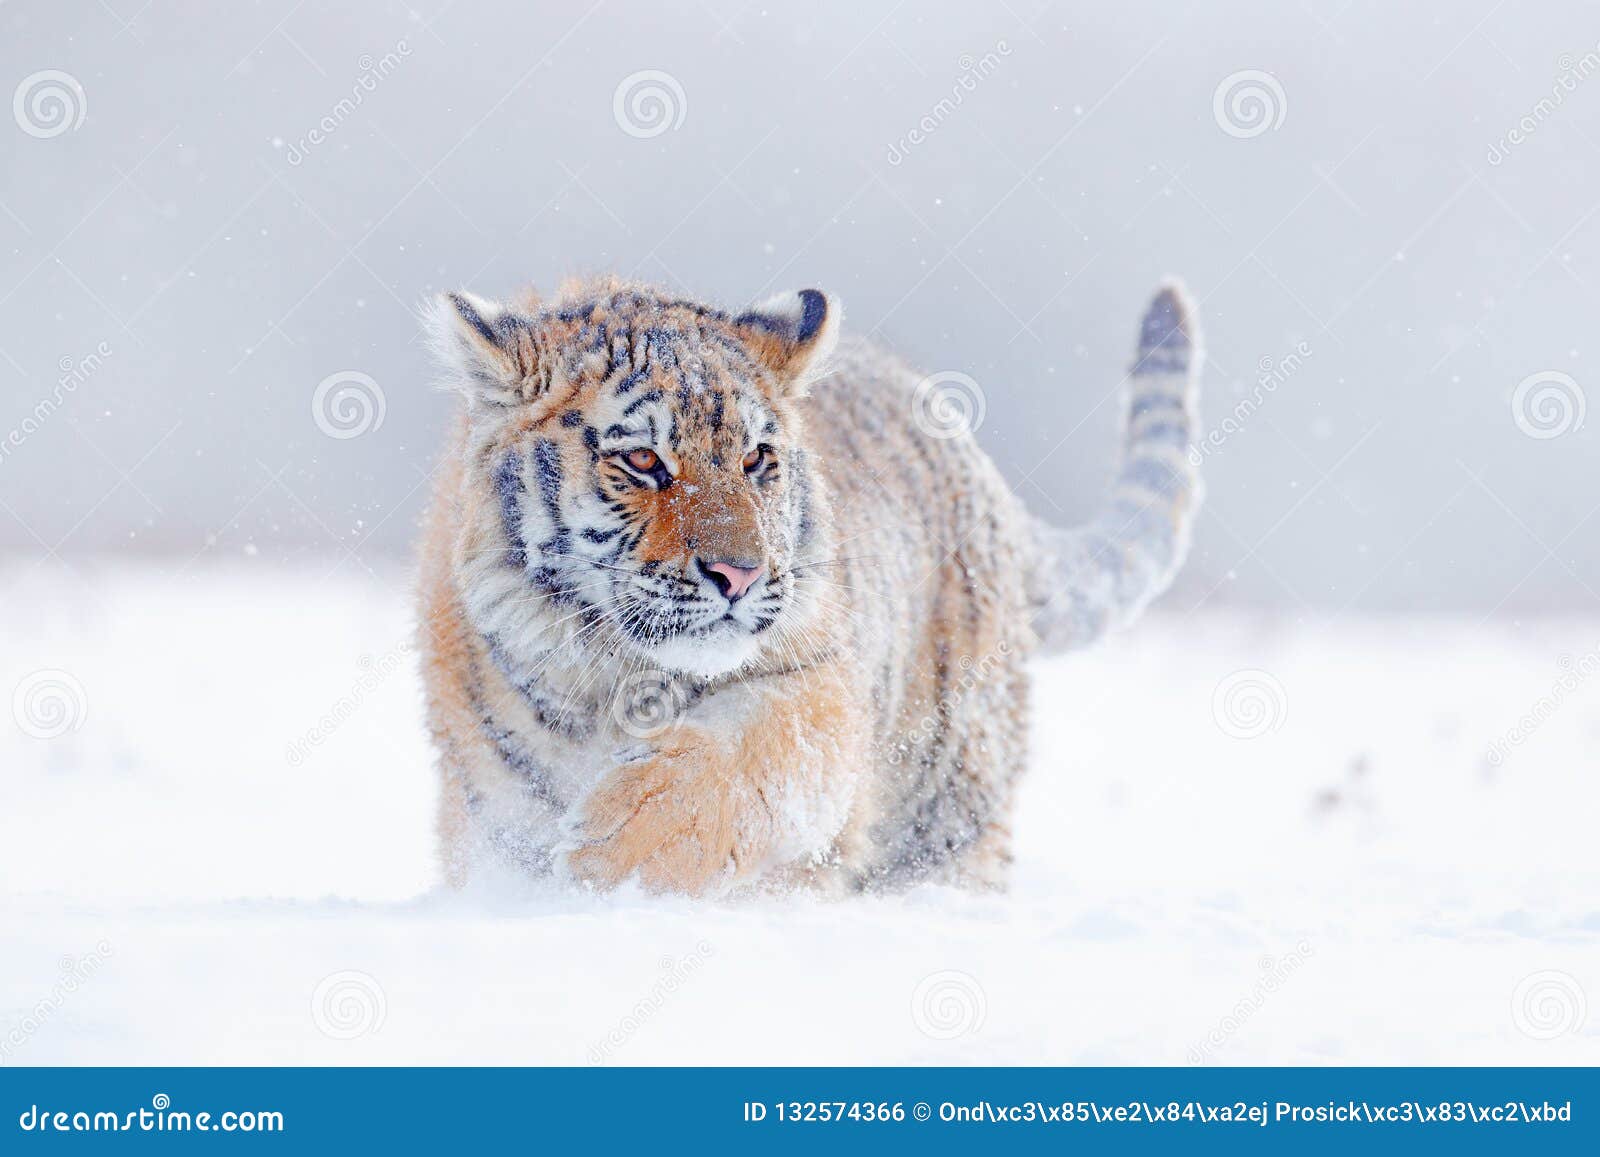 tiger in wild winter nature, running in the snow. siberian tiger, panthera tigris altaica. action wildlife scene with dangerous